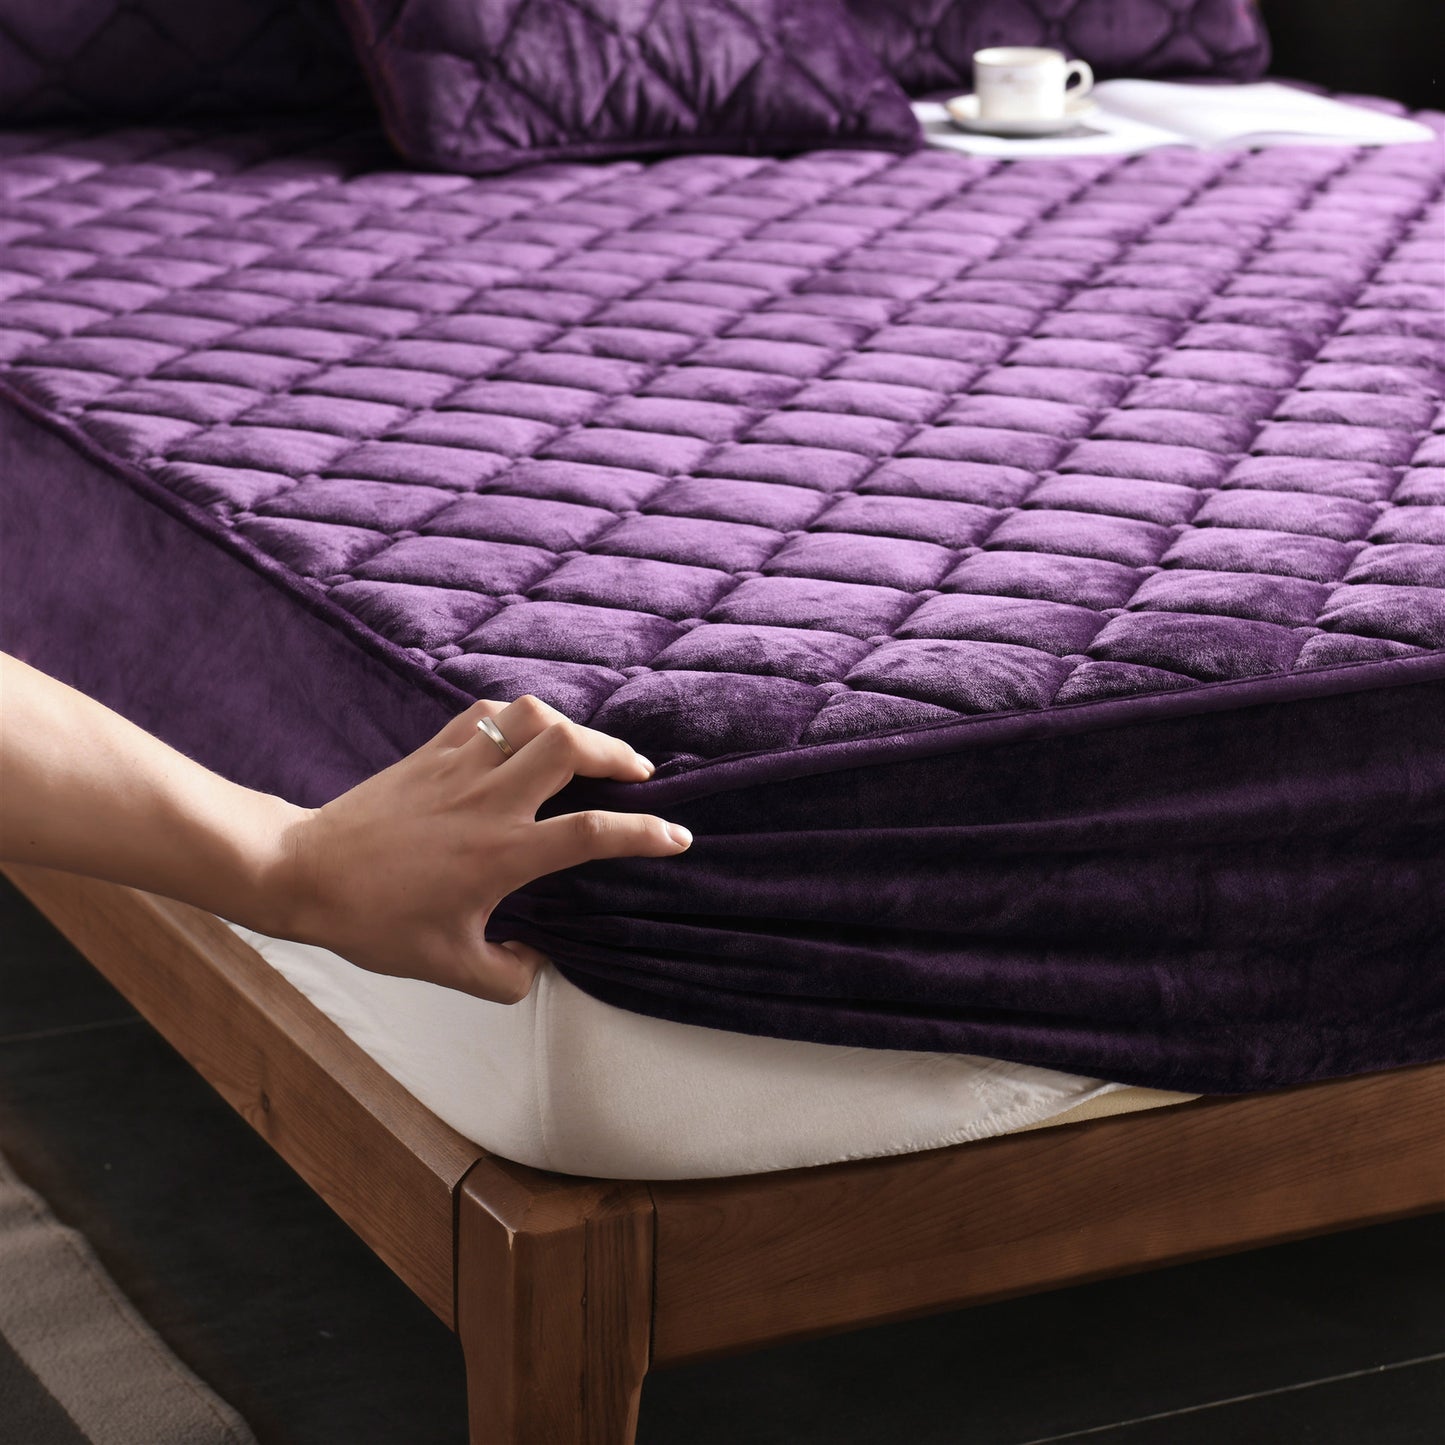 Crystal velvet mattress quilted thickened warm bedspread